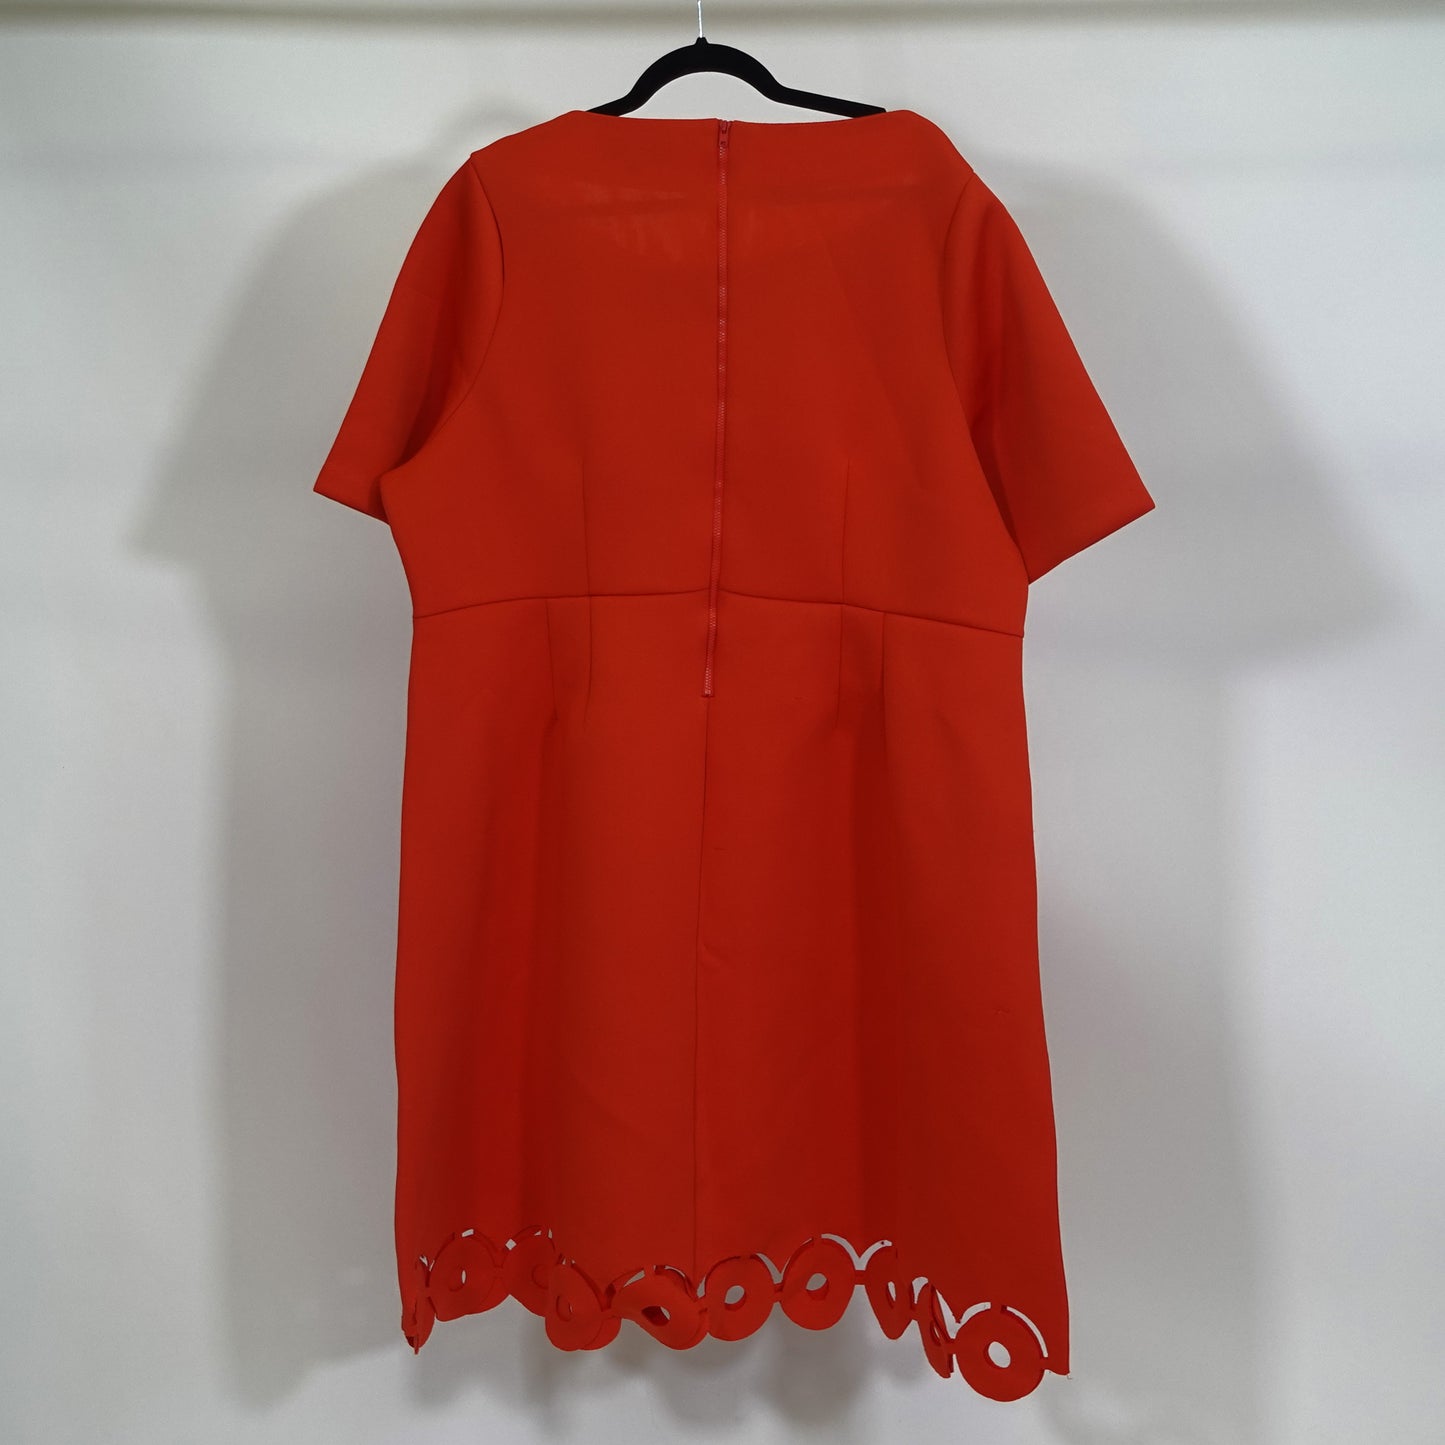 Red A-Line Dress with Laser Cut Design